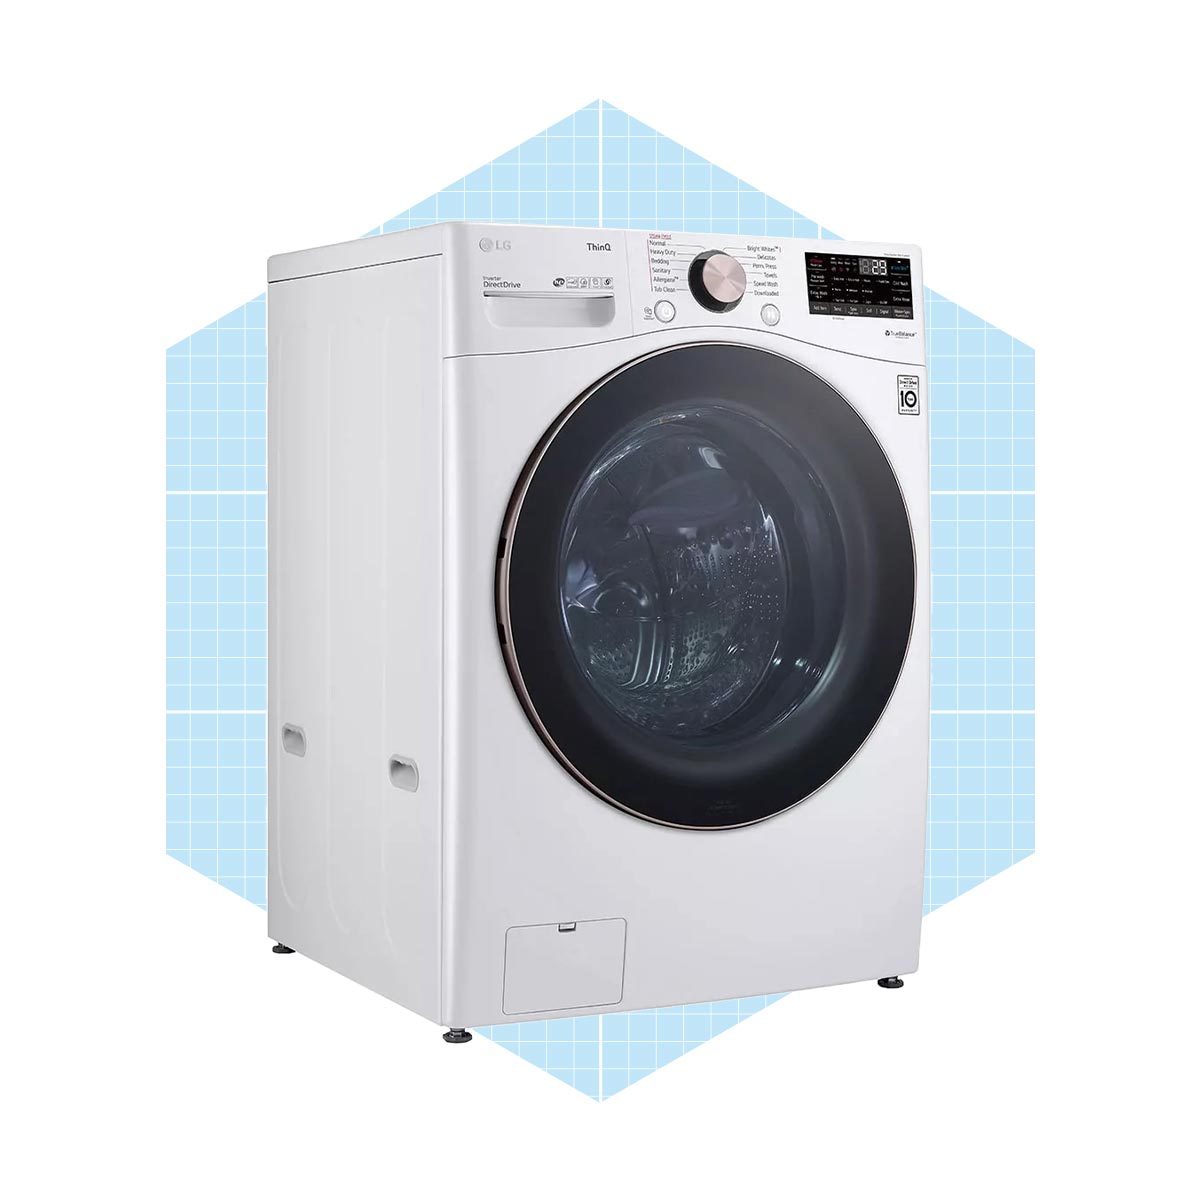 A White LG Washer